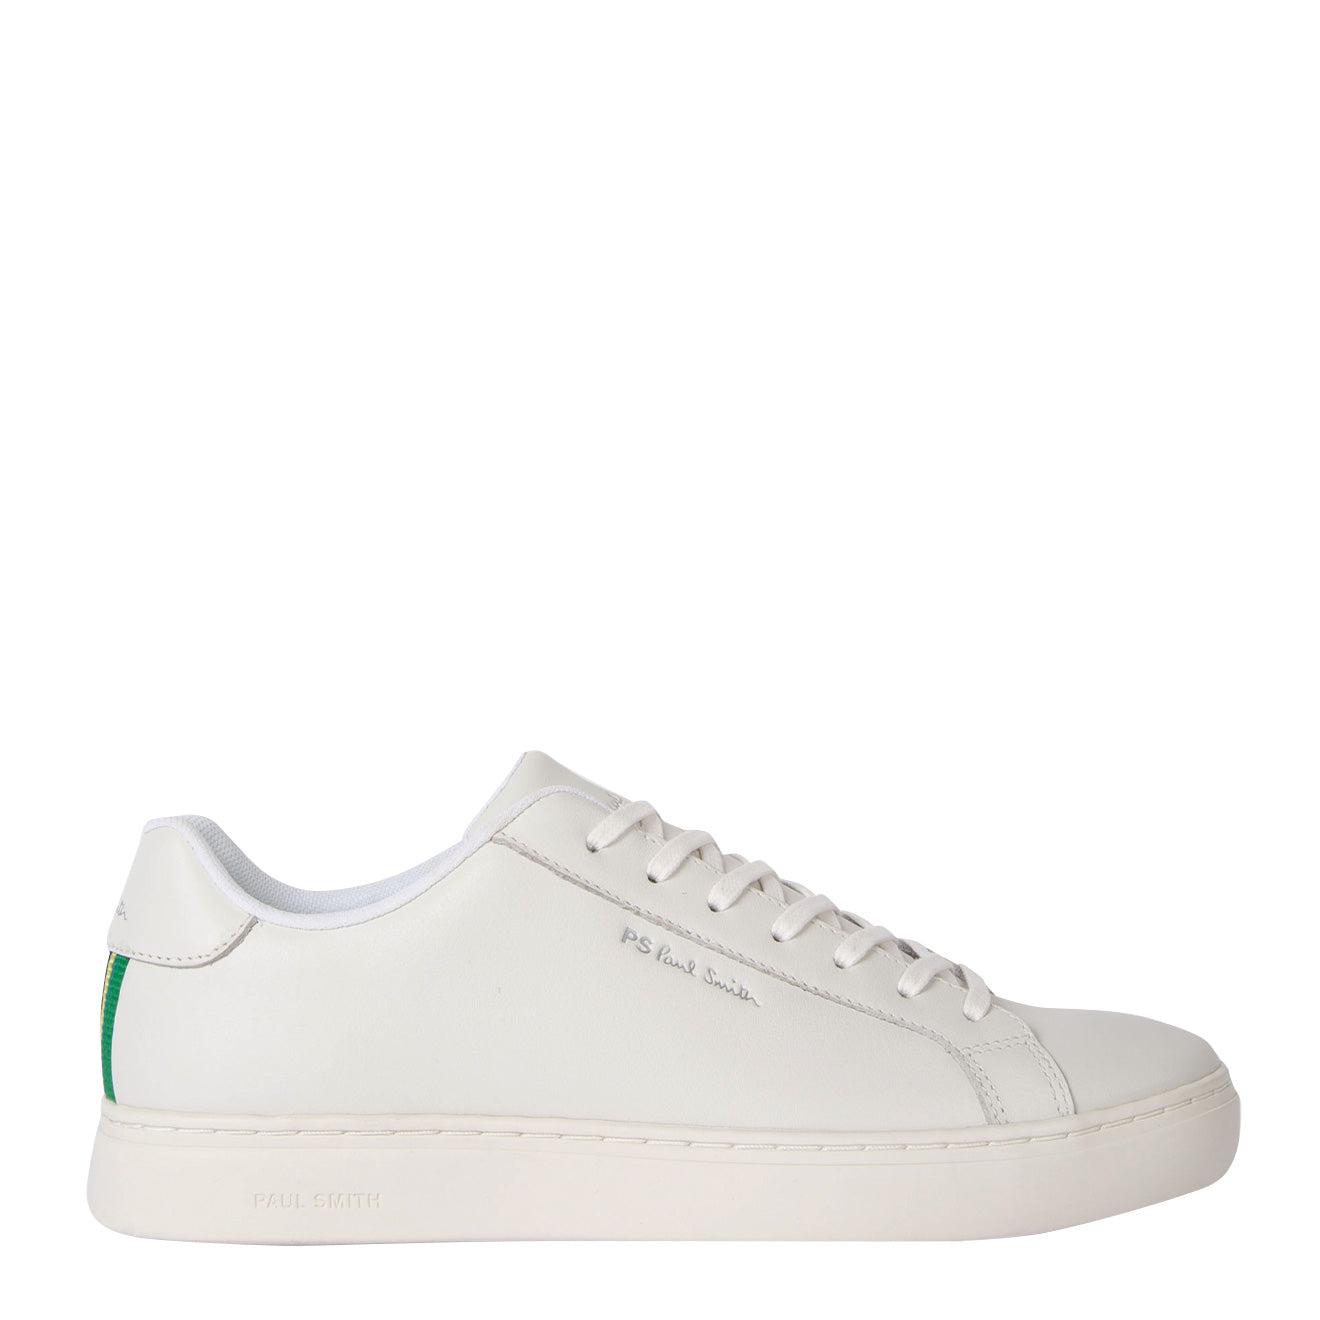 Paul Smith Leather Rex Trainers in White for Men - Save 33% | Lyst